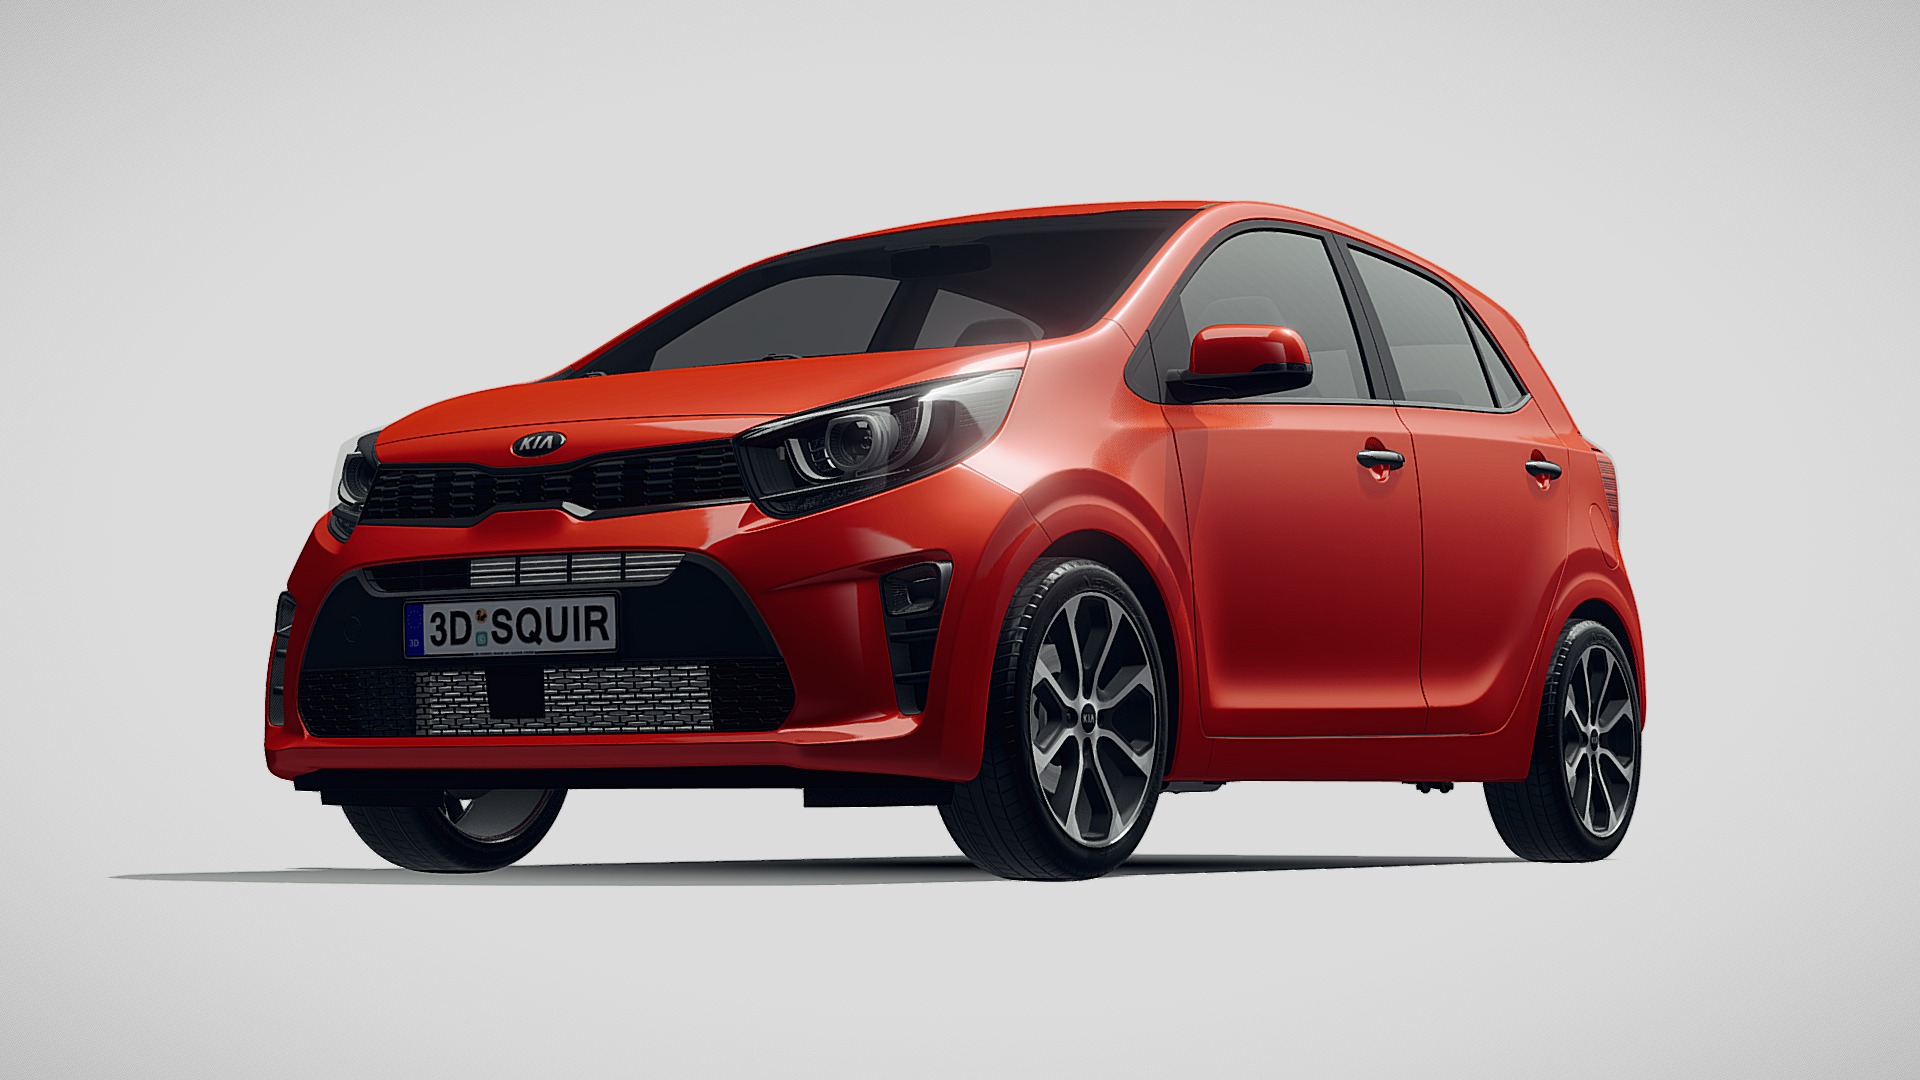 3D model Kia Picanto 2019 - This is a 3D model of the Kia Picanto 2019. The 3D model is about a red car with a white background with Holden Arboretum in the background.